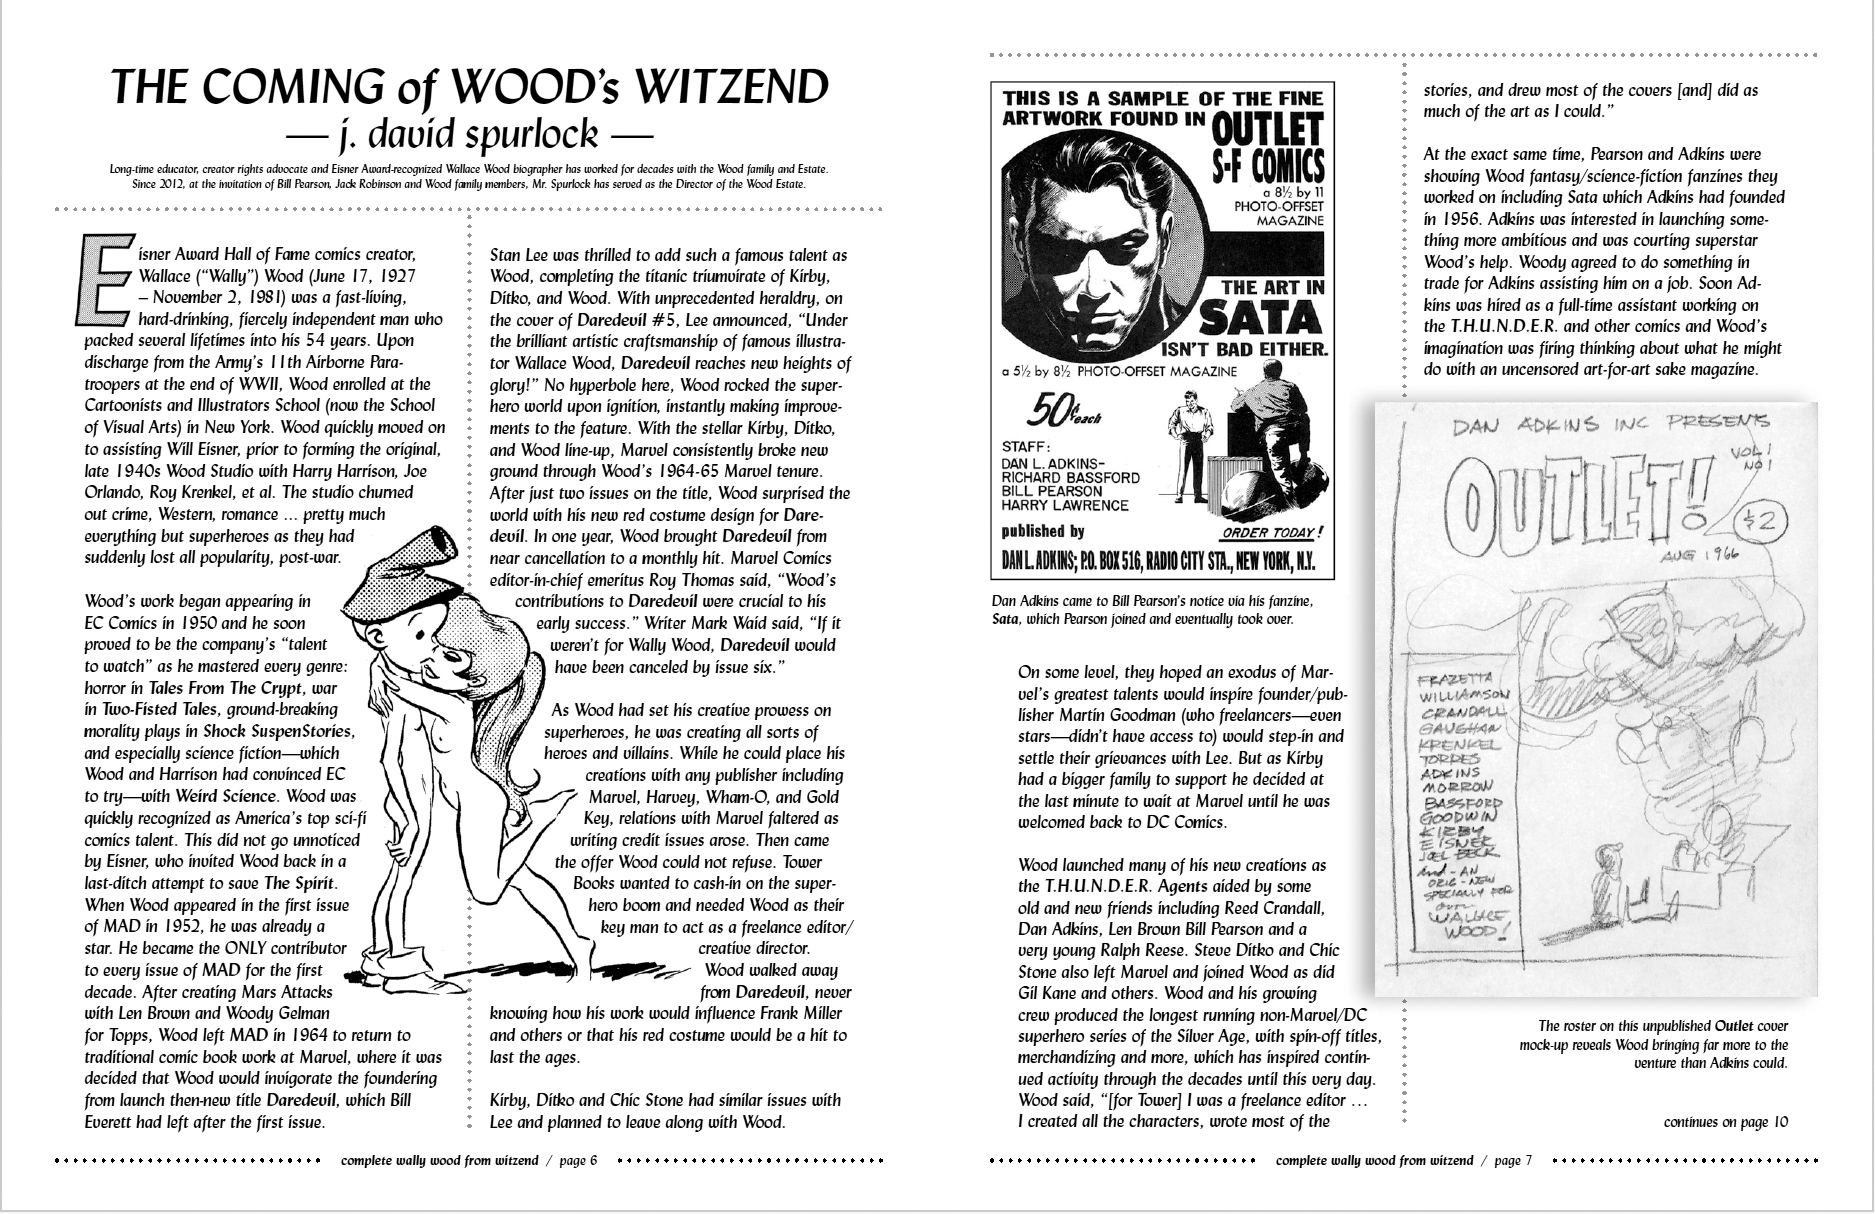 Wally Wood from Witzend Complete Collection